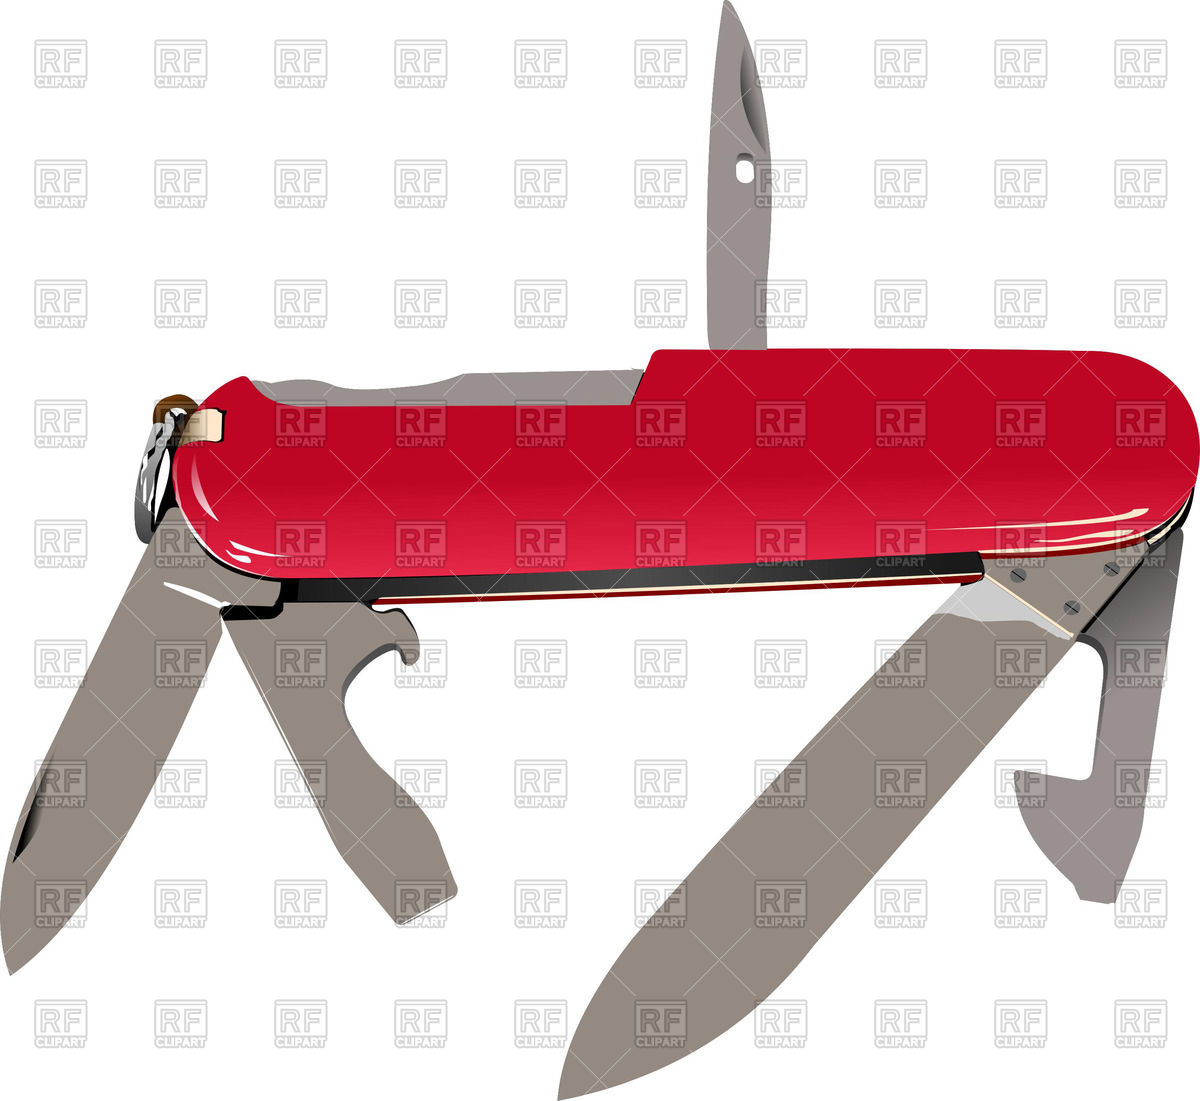     Swiss Pocket Knife 51164 Download Royalty Free Vector Clipart  Eps